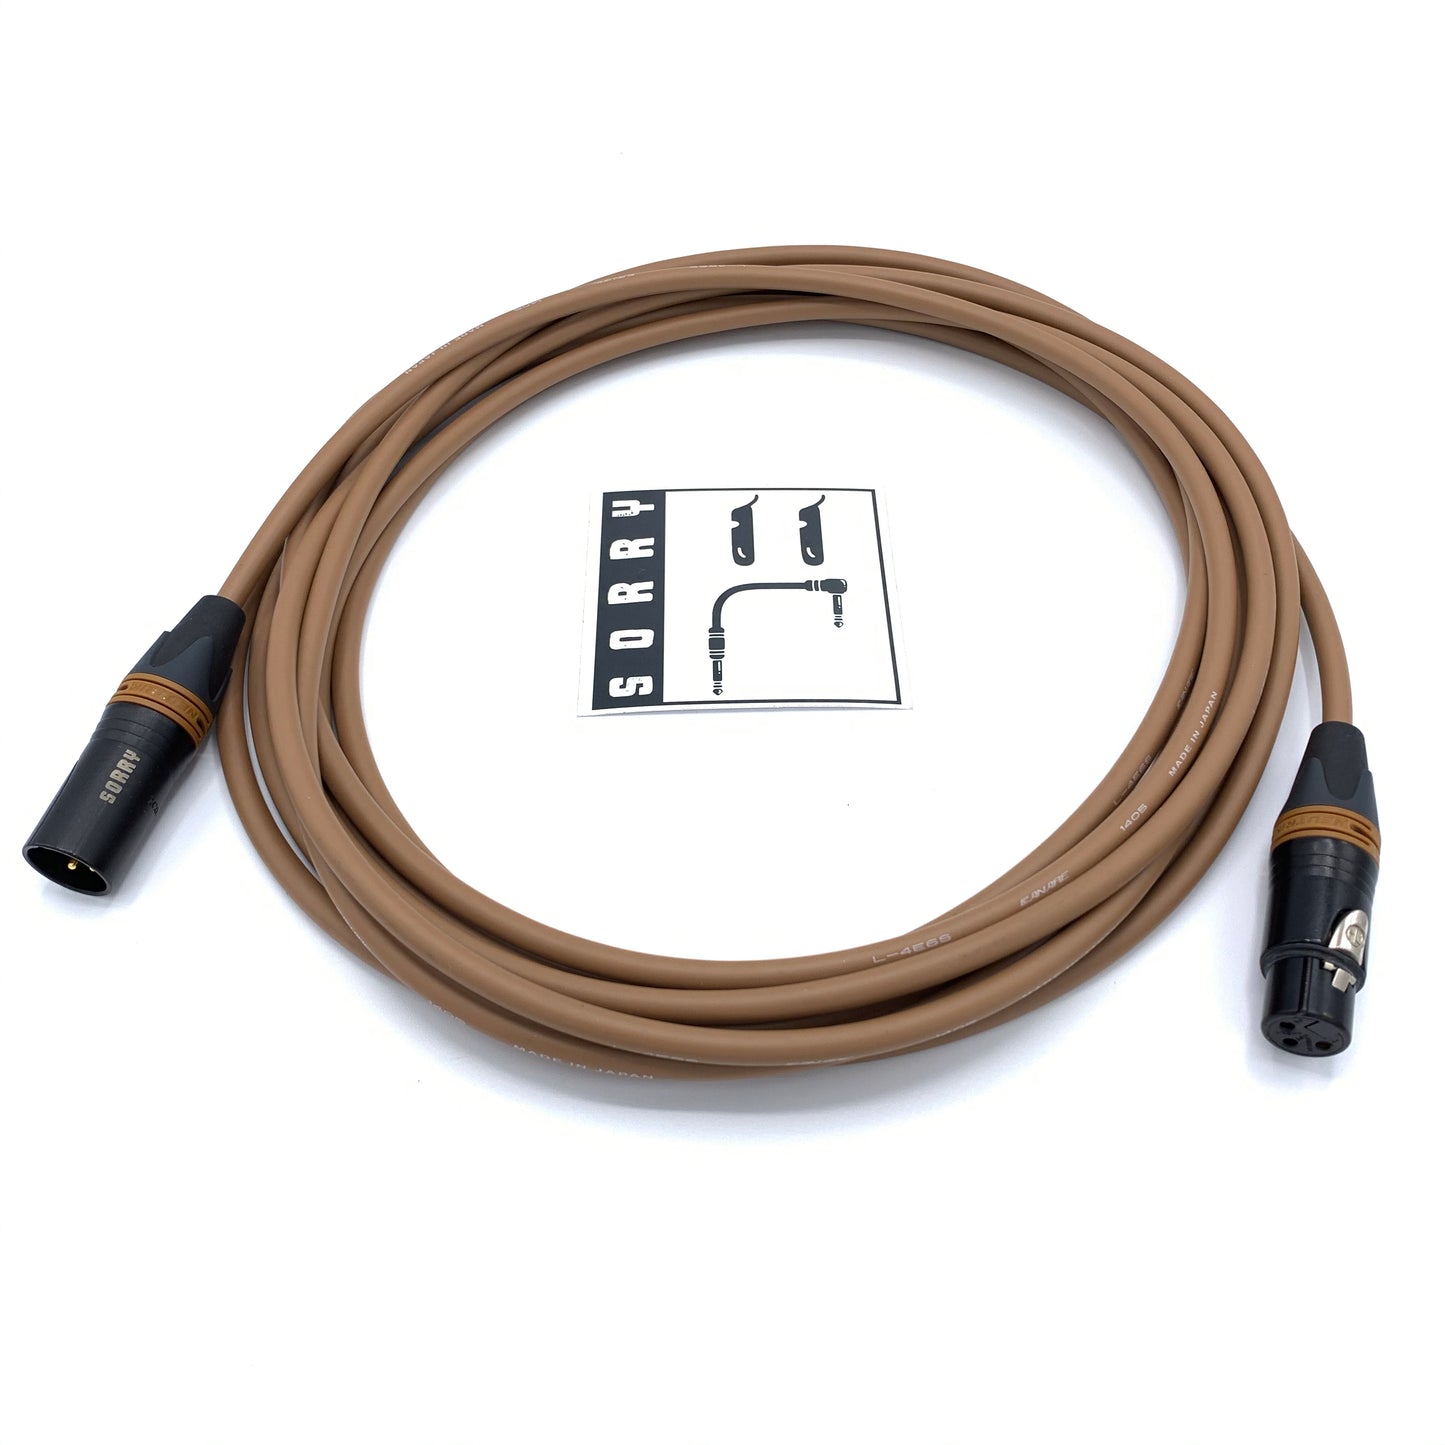 SORRY Microphone Cable - Standard Brown